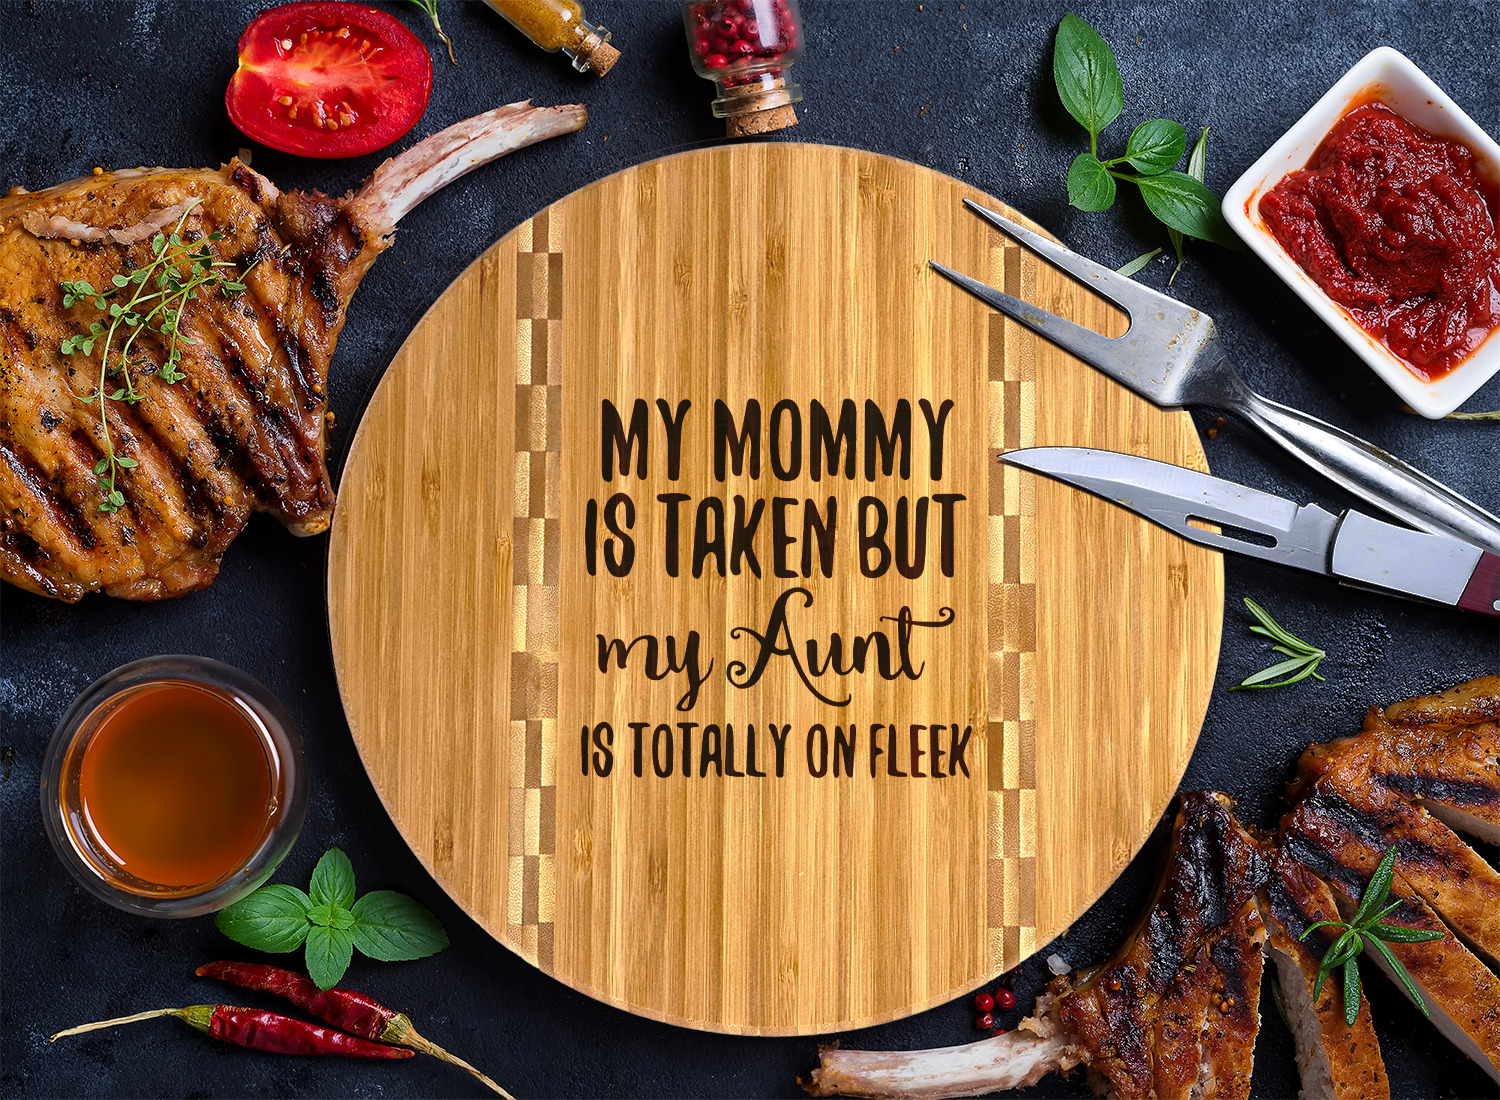 https://www.youcustomizeit.com/common/MAKE/1037992/Aunt-Quotes-and-Sayings-Bamboo-Cutting-Boards-LIFESTYLE.jpg?lm=1658265452